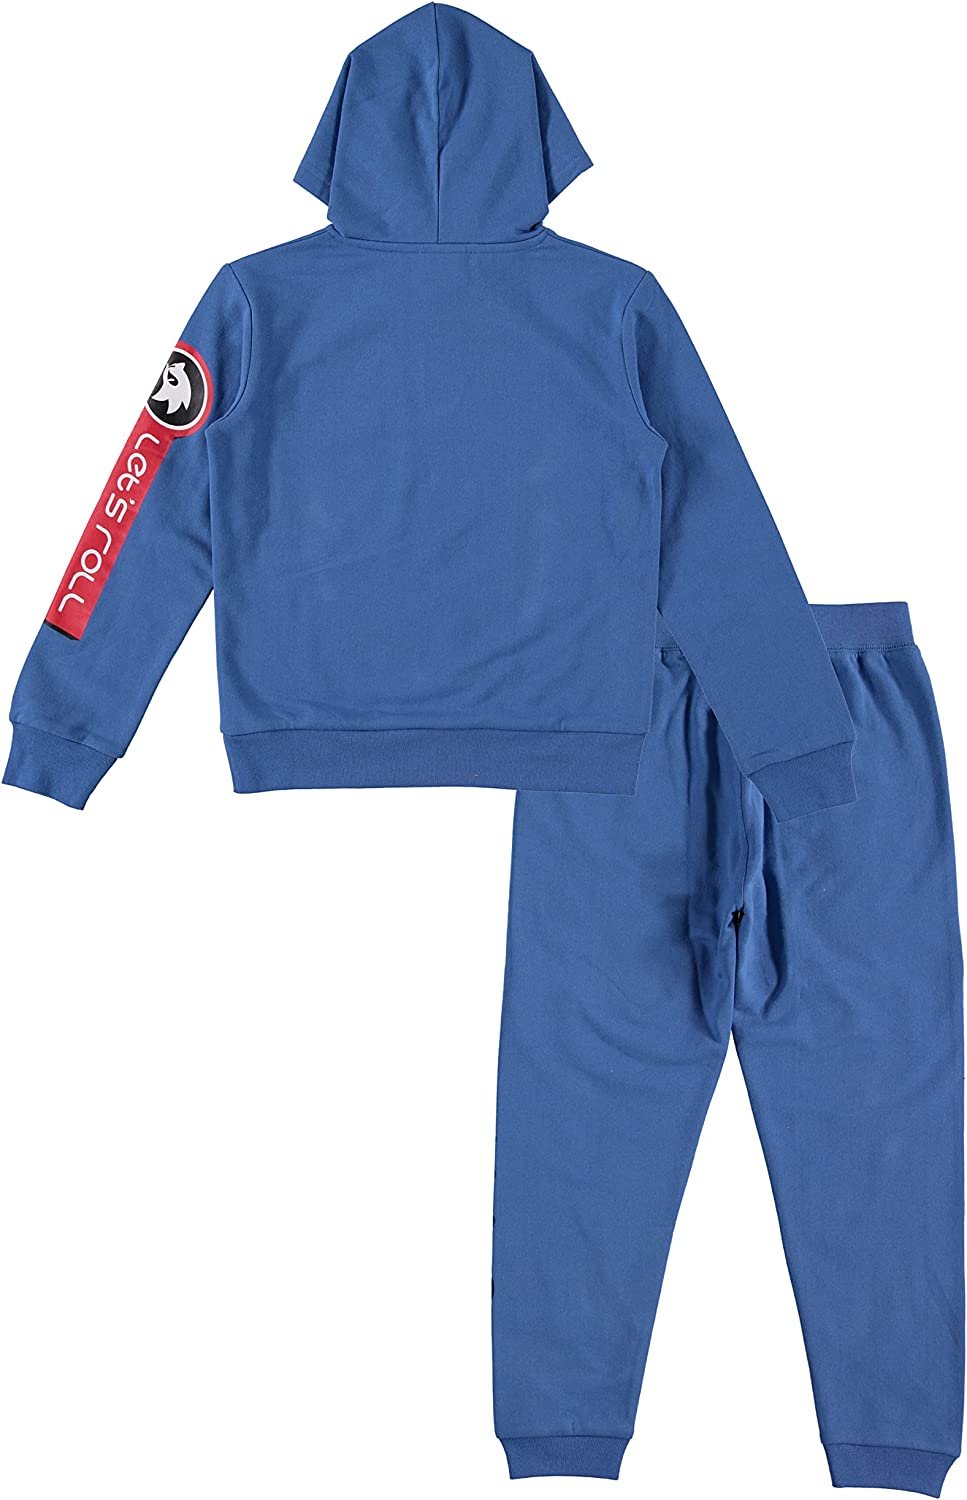 FREEZE Boys Sonic Hoodie and Jogger Sweatpants - Sonic The Hedgehog Boys 2-Piece Outfit Set sizes 4-16